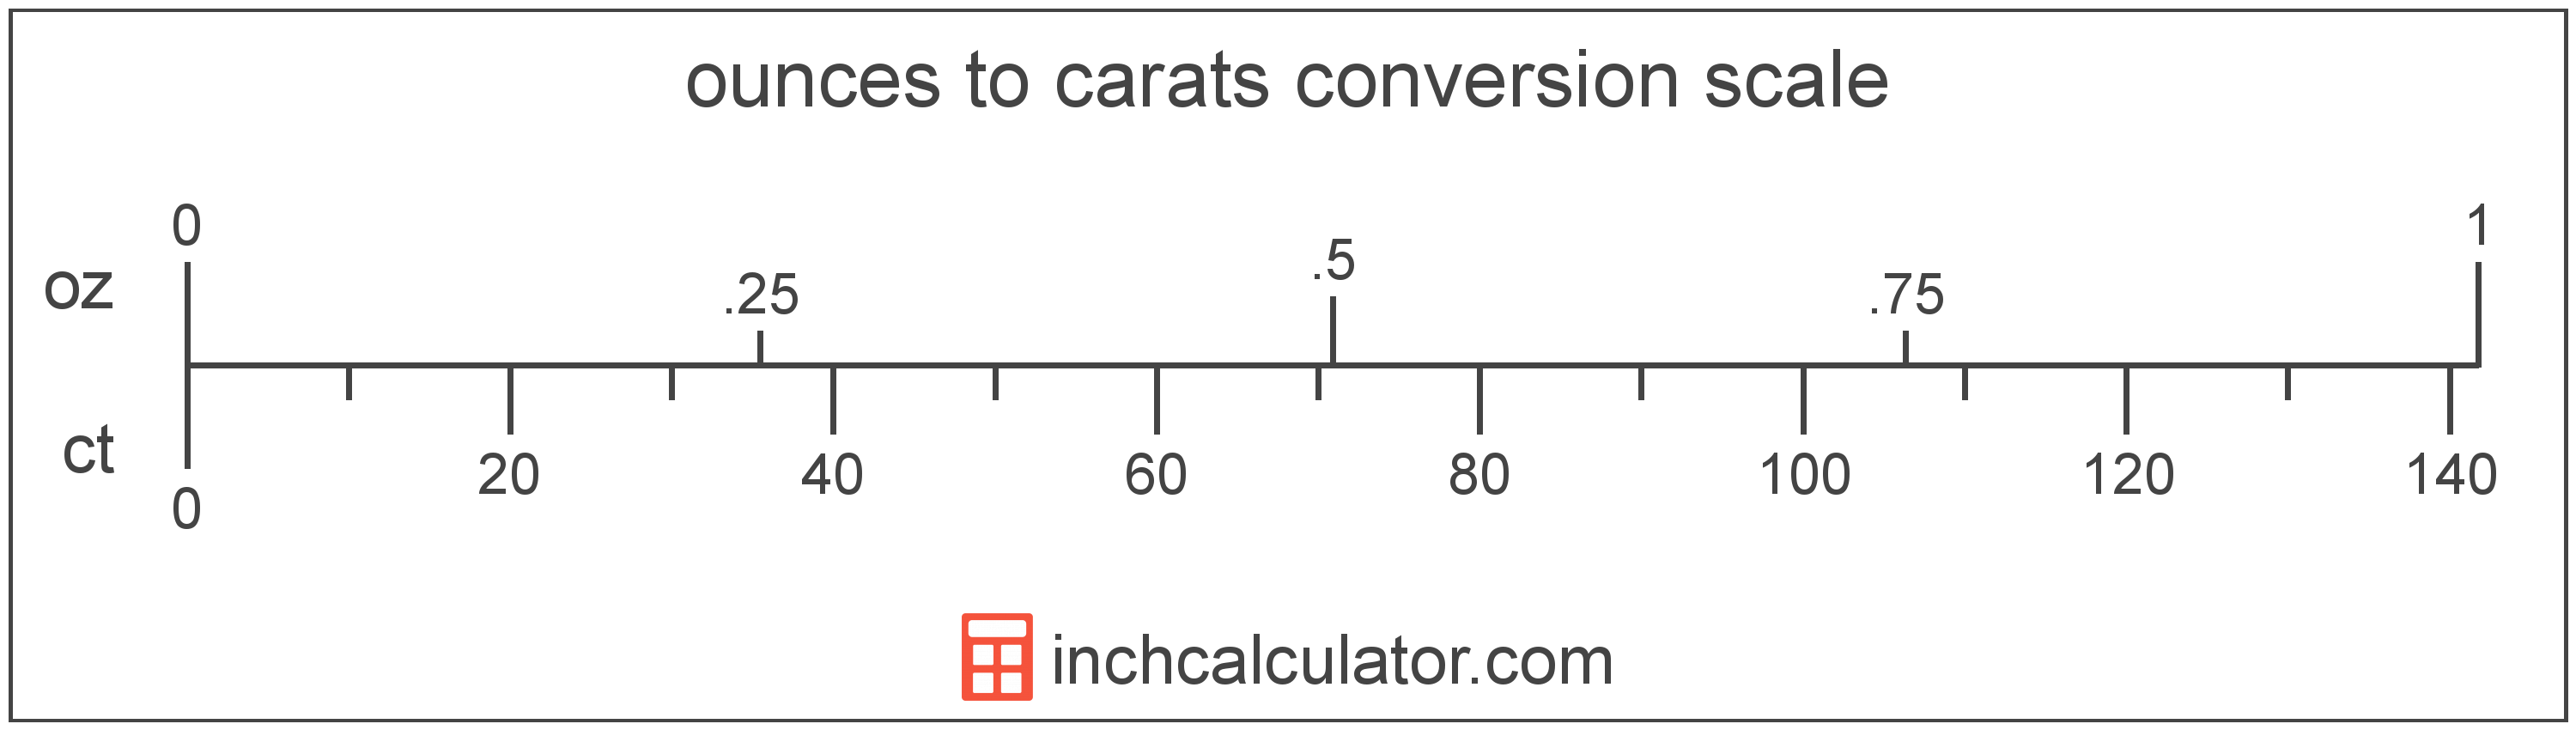 conversion scale showing ounces and equivalent carats weight values